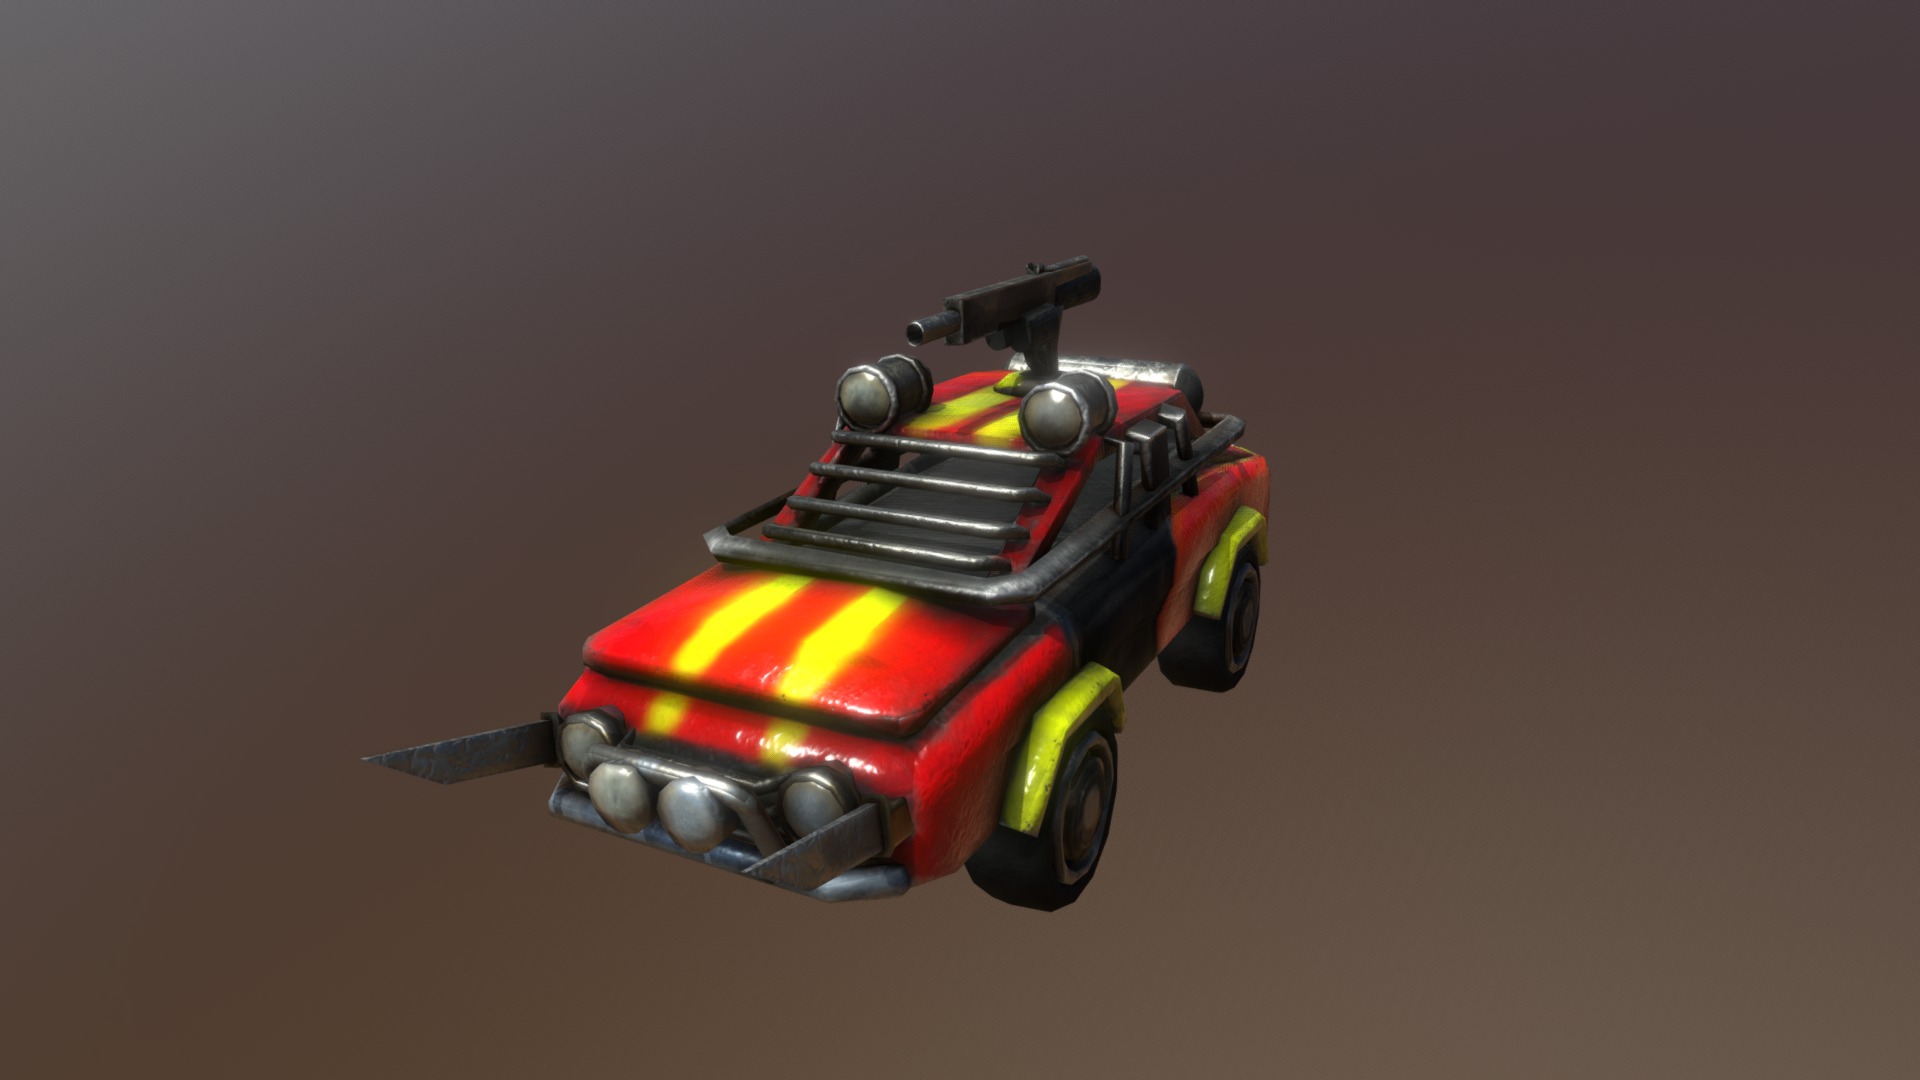 3D model Commercial – Wasteland Dweller’s Vehicle - This is a 3D model of the Commercial - Wasteland Dweller's Vehicle. The 3D model is about a toy car with a red and yellow top.